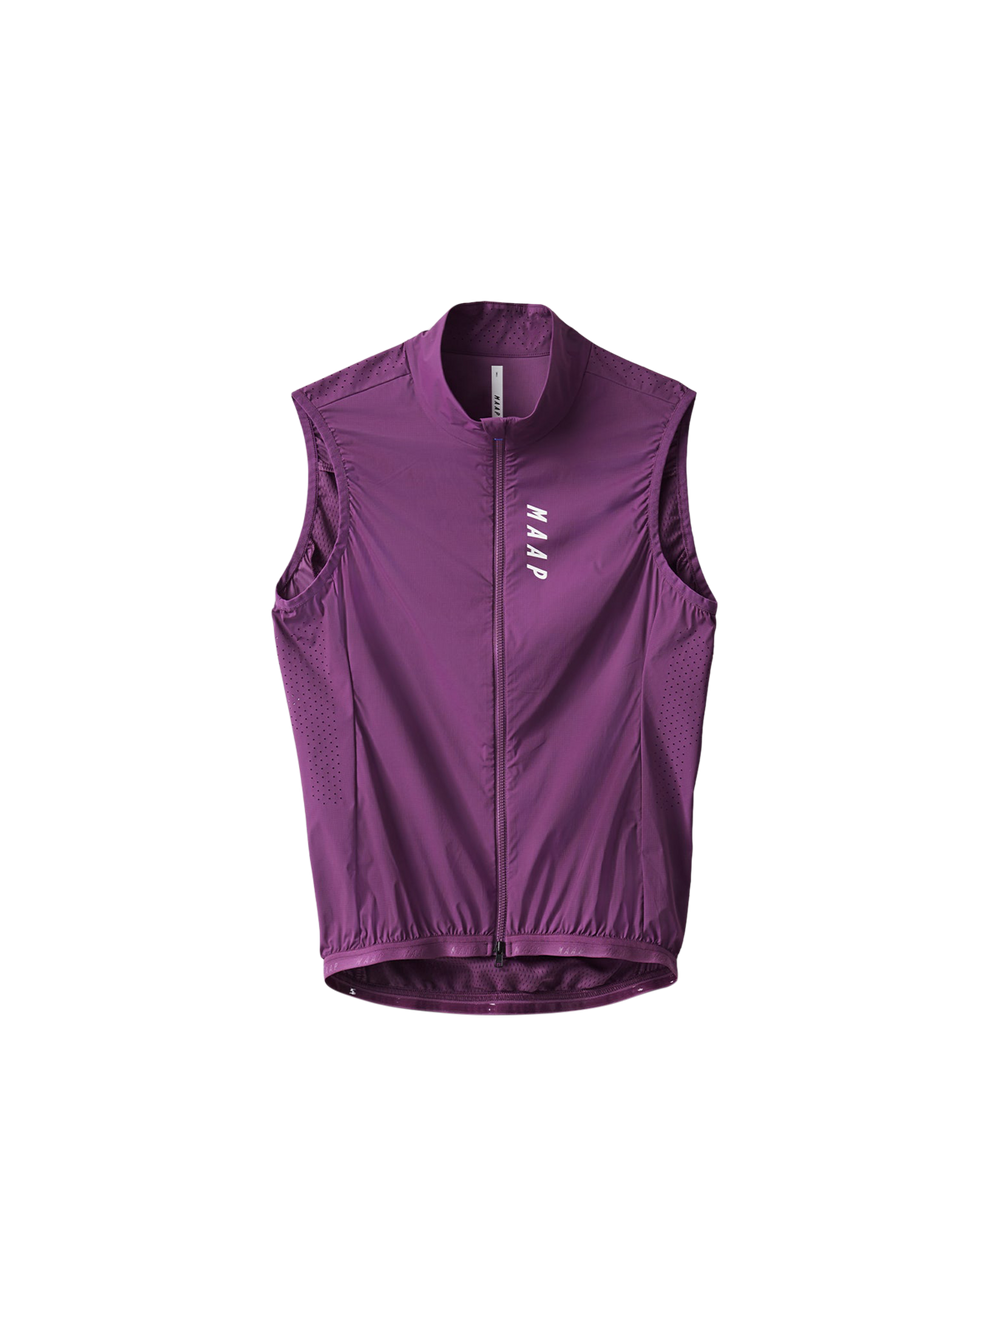 Product Image for Draft Team Vest